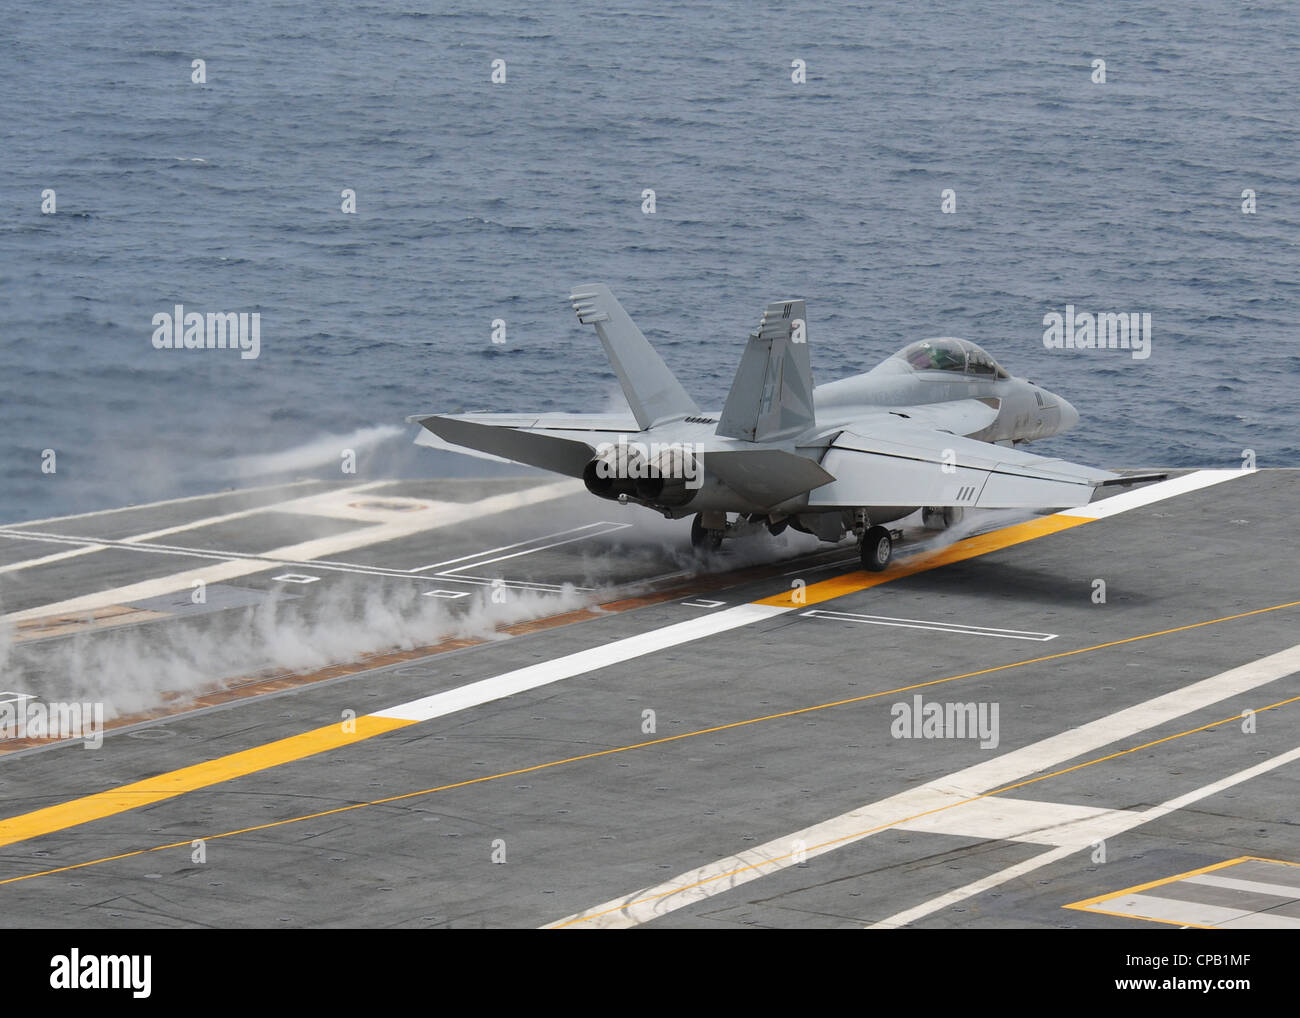 An F/A-18F Super Hornet assigned to the Black Knights of Strike Fighter Squadron (VFA) 154 launches from the aircraft carrier USS Nimitz (CVN 68). Nimitz is conducting carrier qualifications off the coast of southern California. Stock Photo